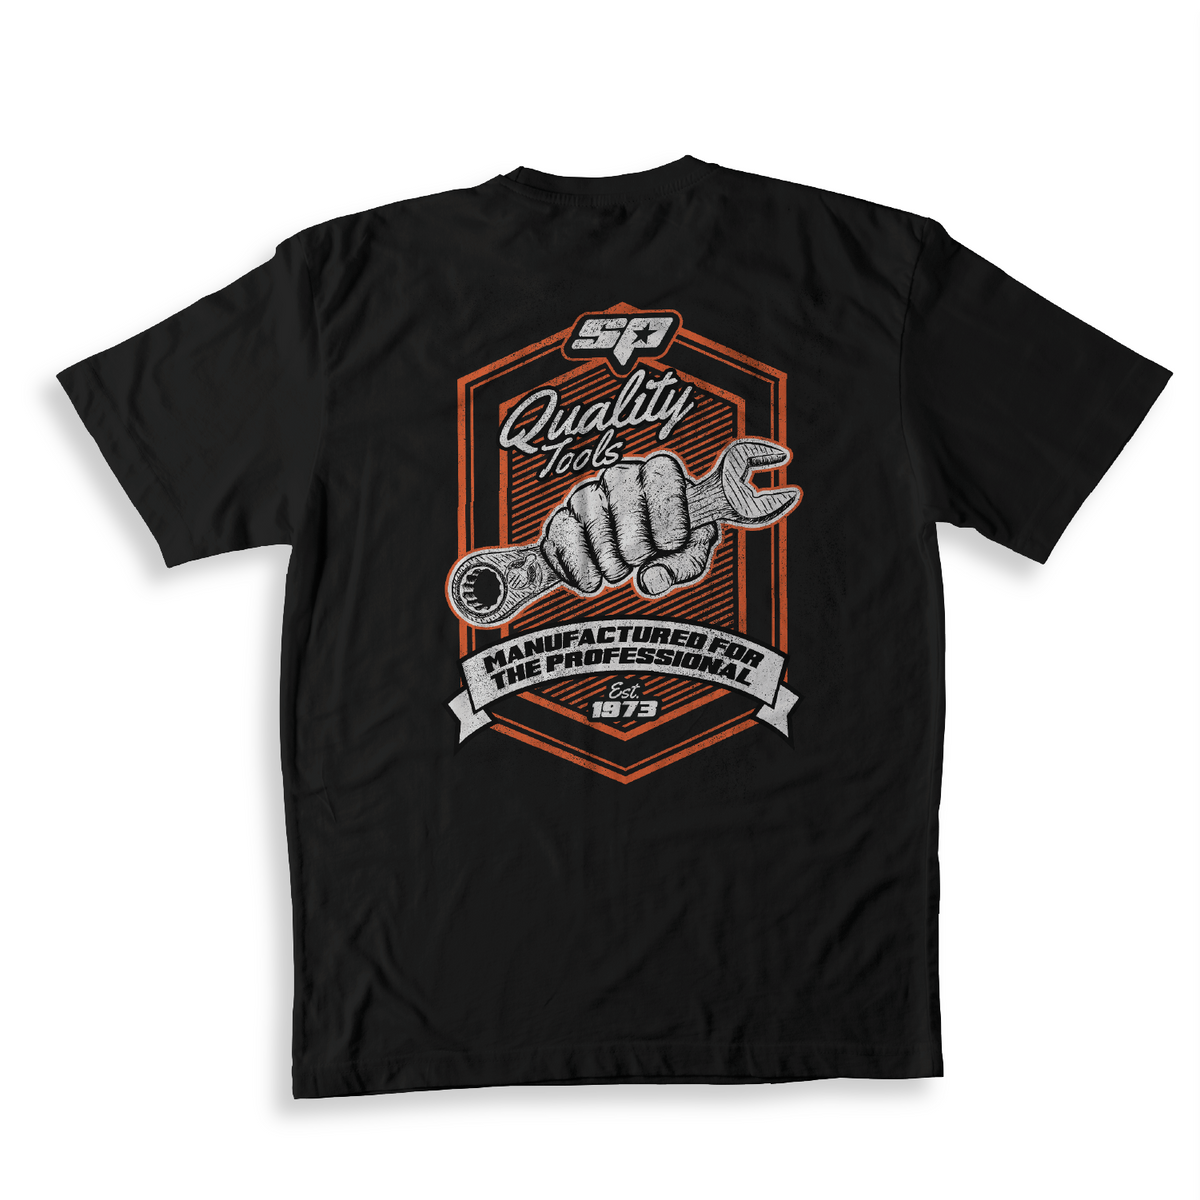 SP TOOLS FIST SHIRT - EXTRA LARGE